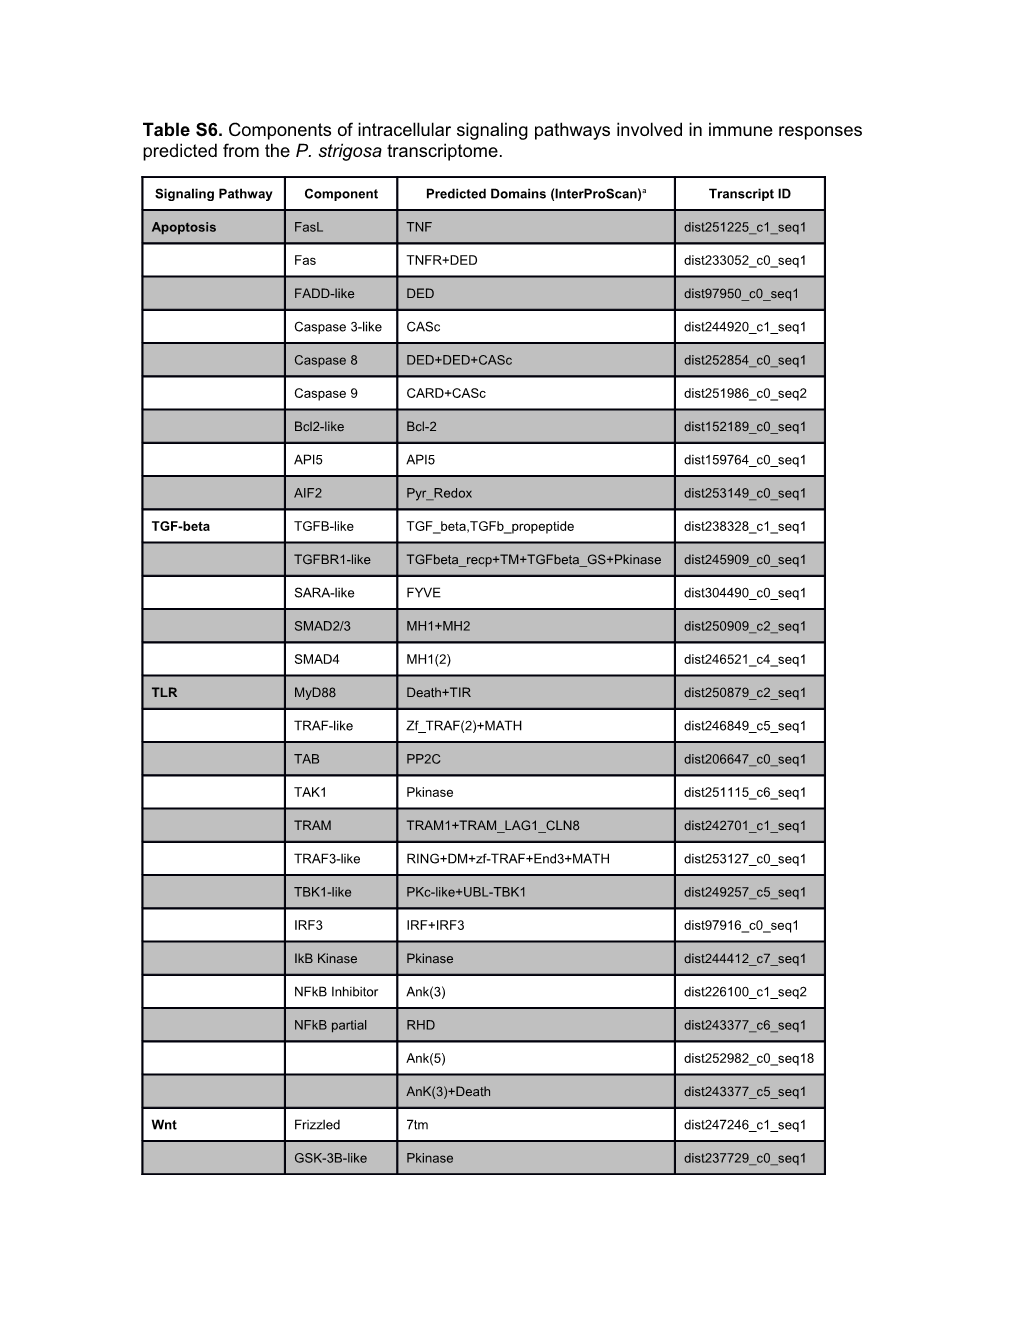 Table S6.Components of Intracellular Signaling Pathways Involved in Immune Responses Predicted